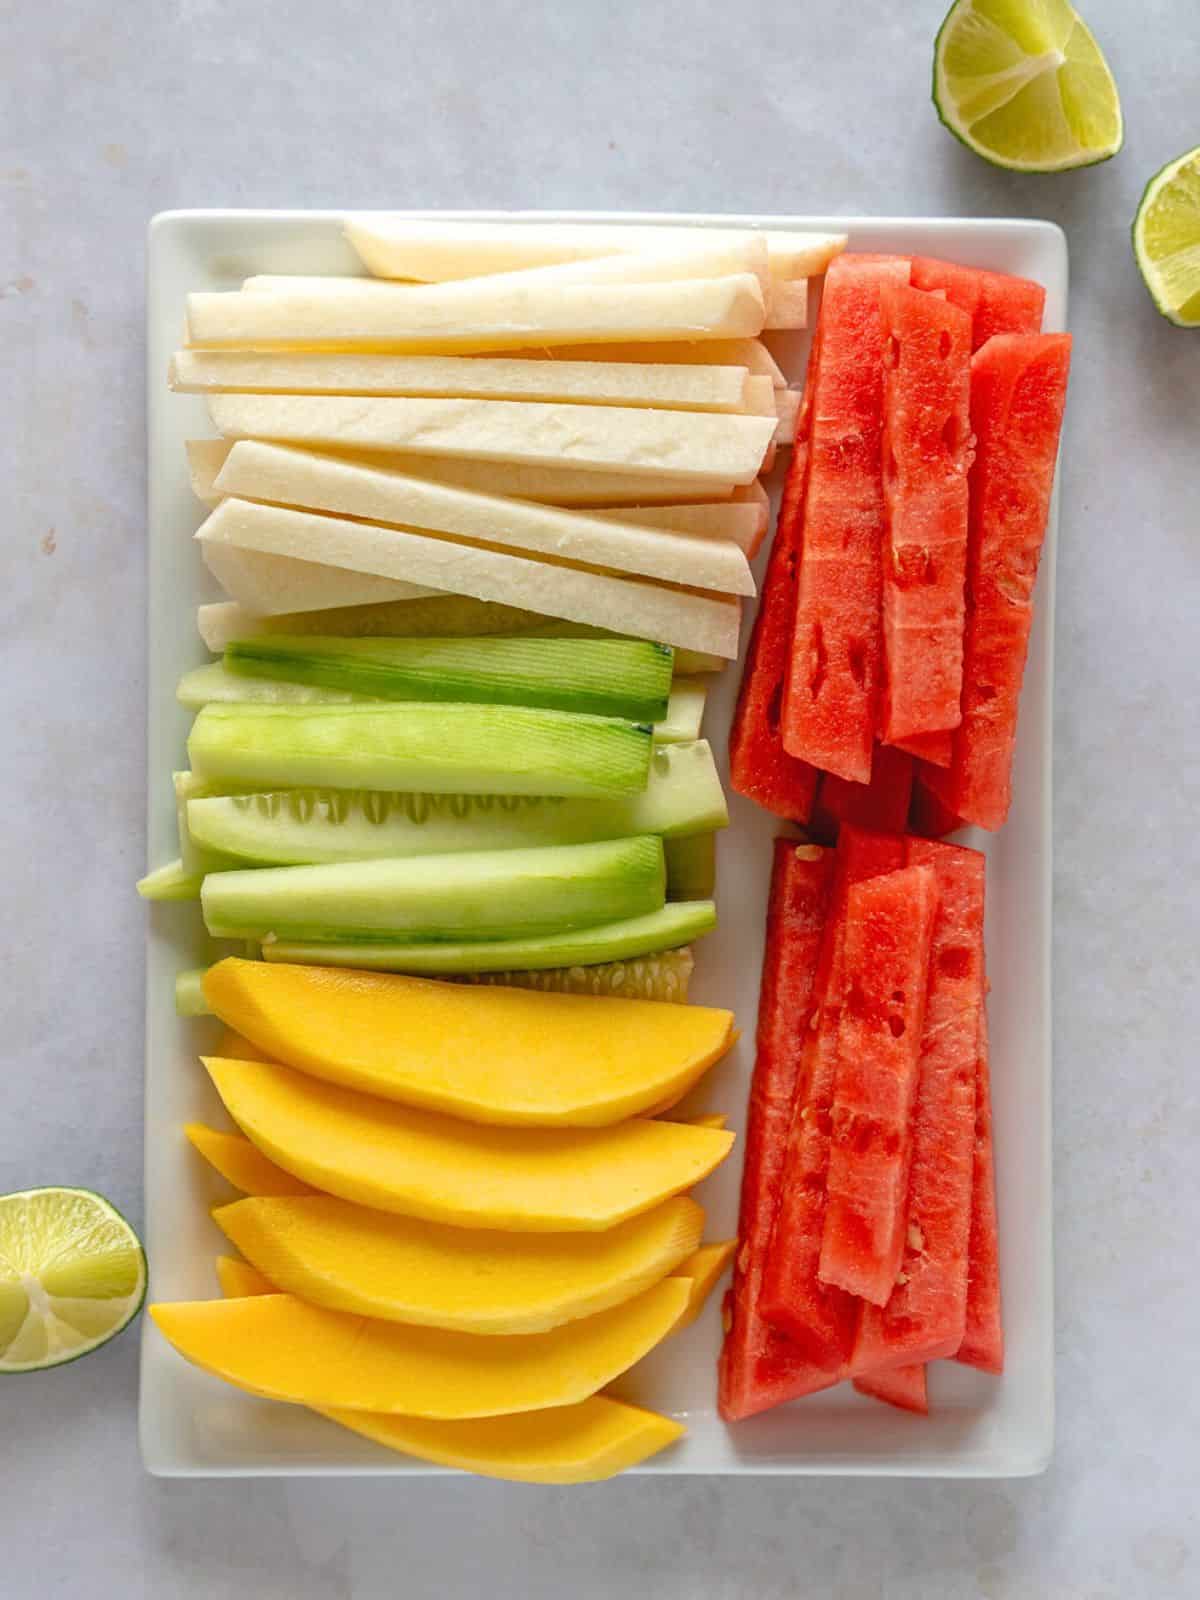 Sliced jicama, cucumber, mango, and watermelon on a rectangular plate with lime wedges on the side.